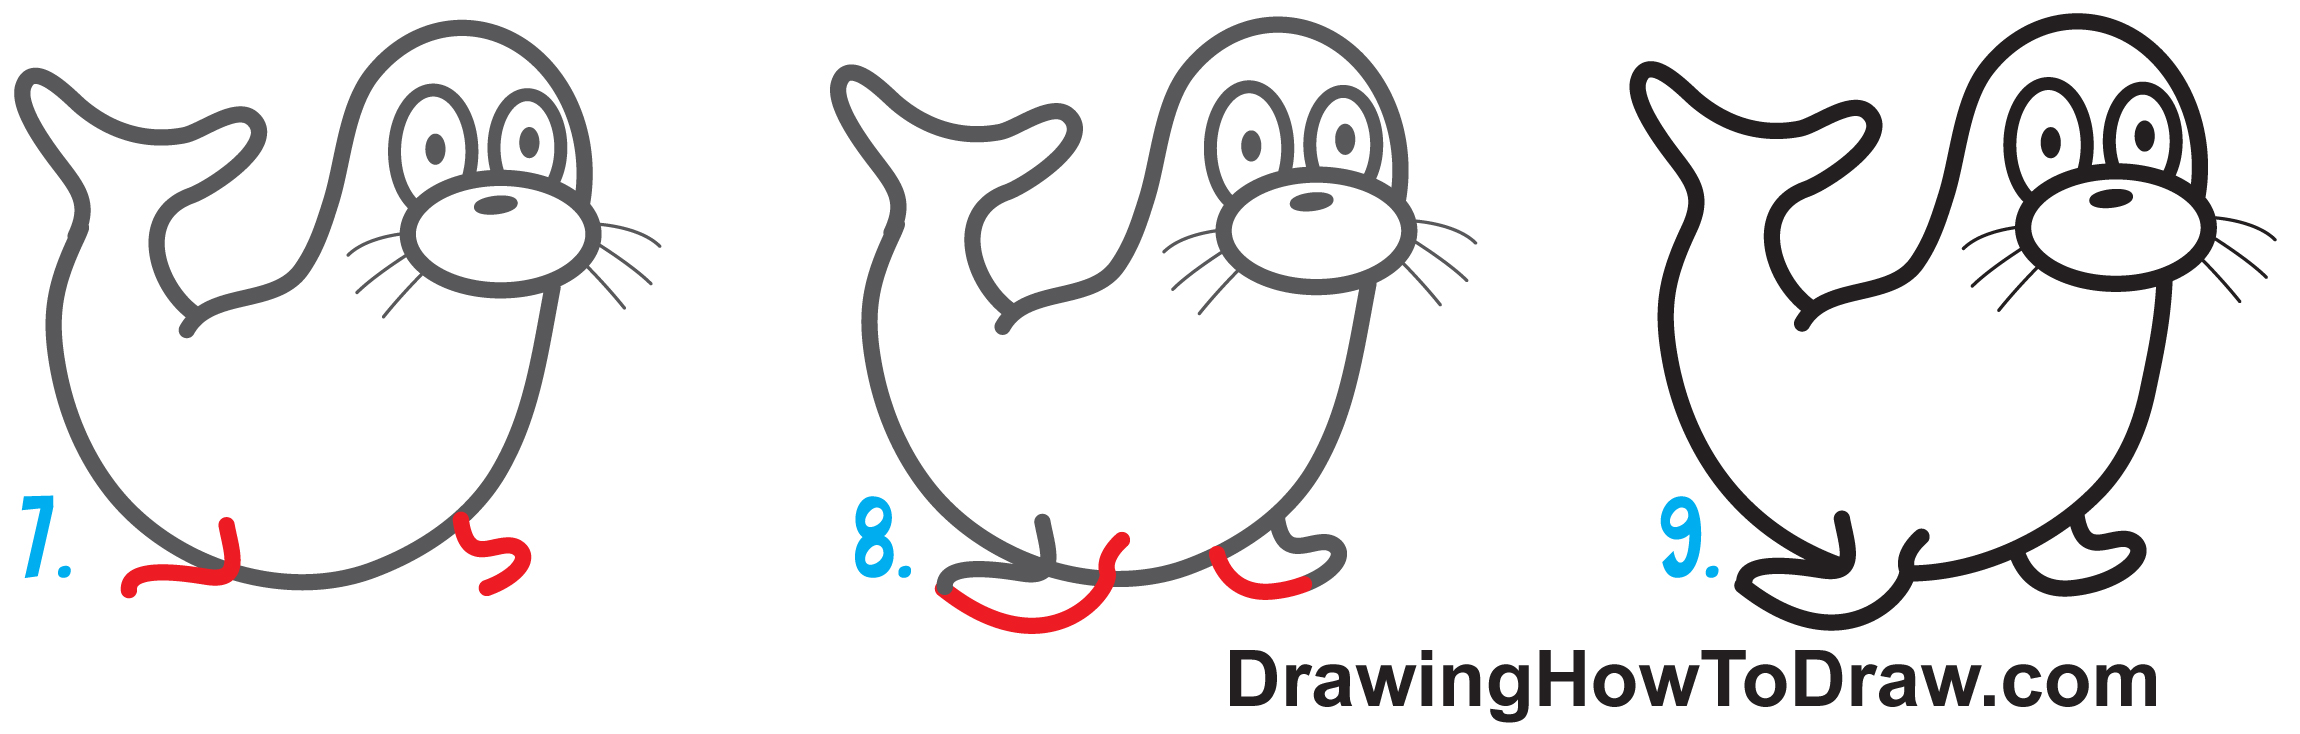 Easy way to draw the Seal